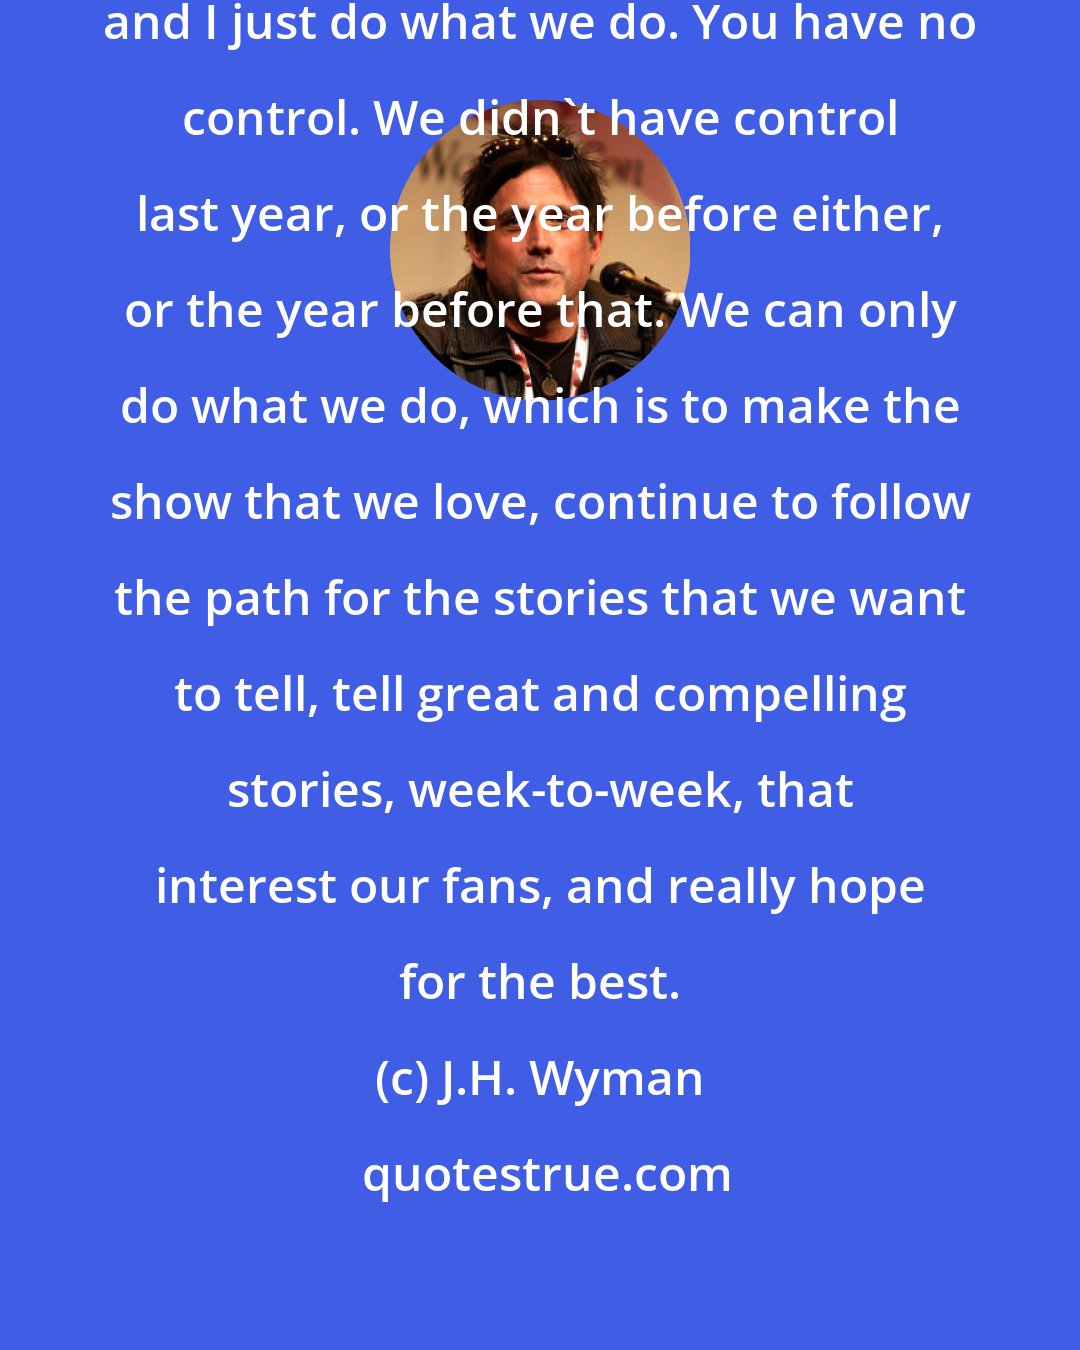 J.H. Wyman: The God-honest truth is that Jeff and I just do what we do. You have no control. We didn't have control last year, or the year before either, or the year before that. We can only do what we do, which is to make the show that we love, continue to follow the path for the stories that we want to tell, tell great and compelling stories, week-to-week, that interest our fans, and really hope for the best.